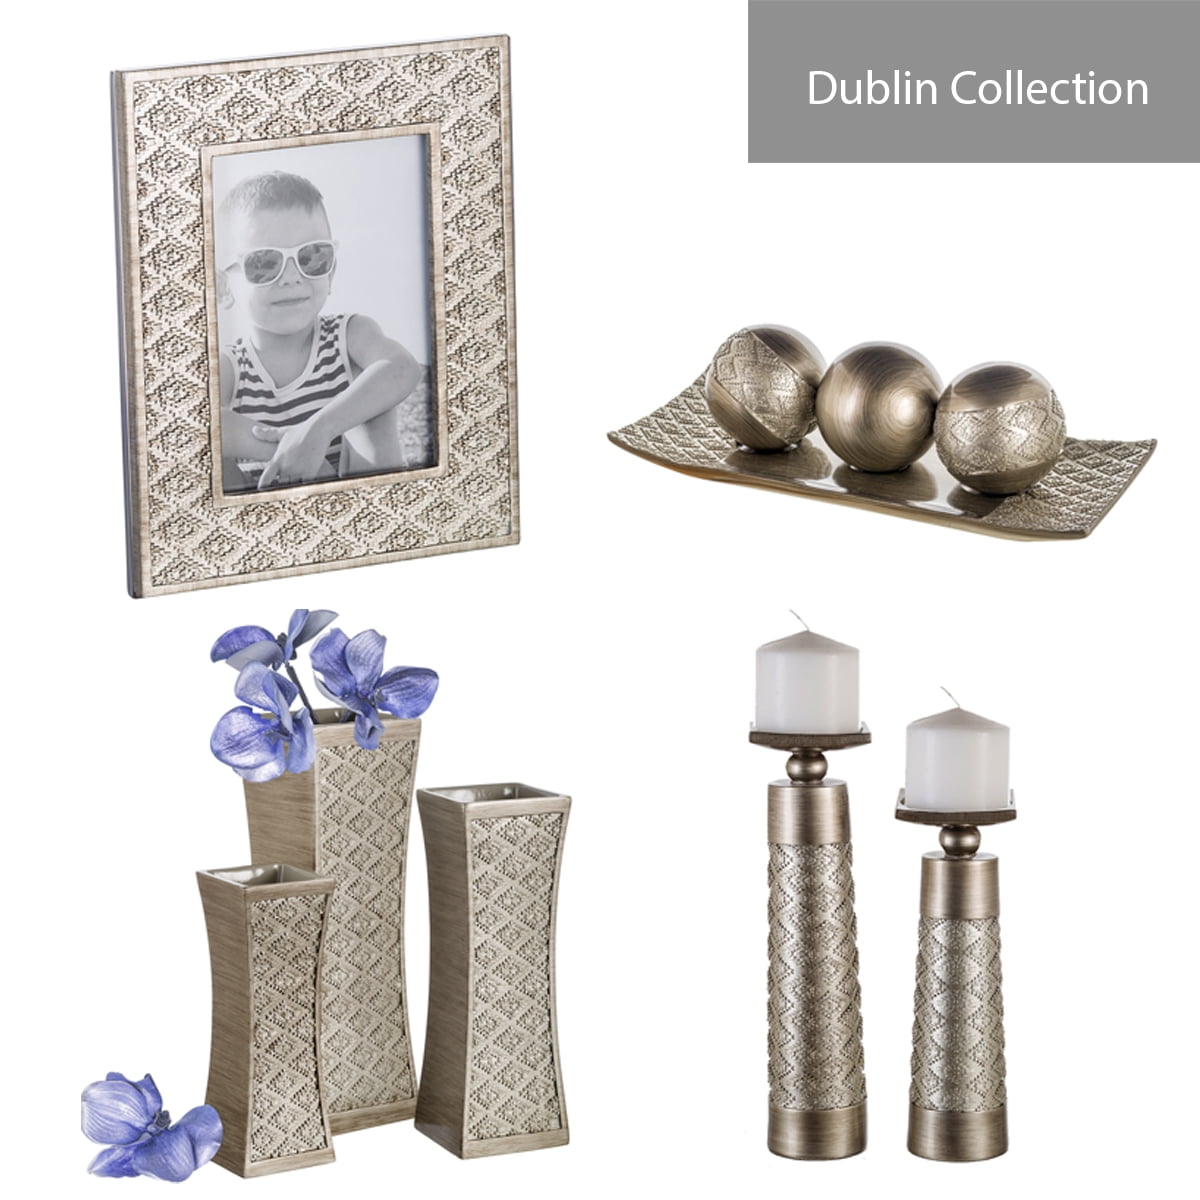 Centerpiece Bowl with Balls Kit Details about   Dublin Decorative Tray and Orbs/Balls Set of 3 